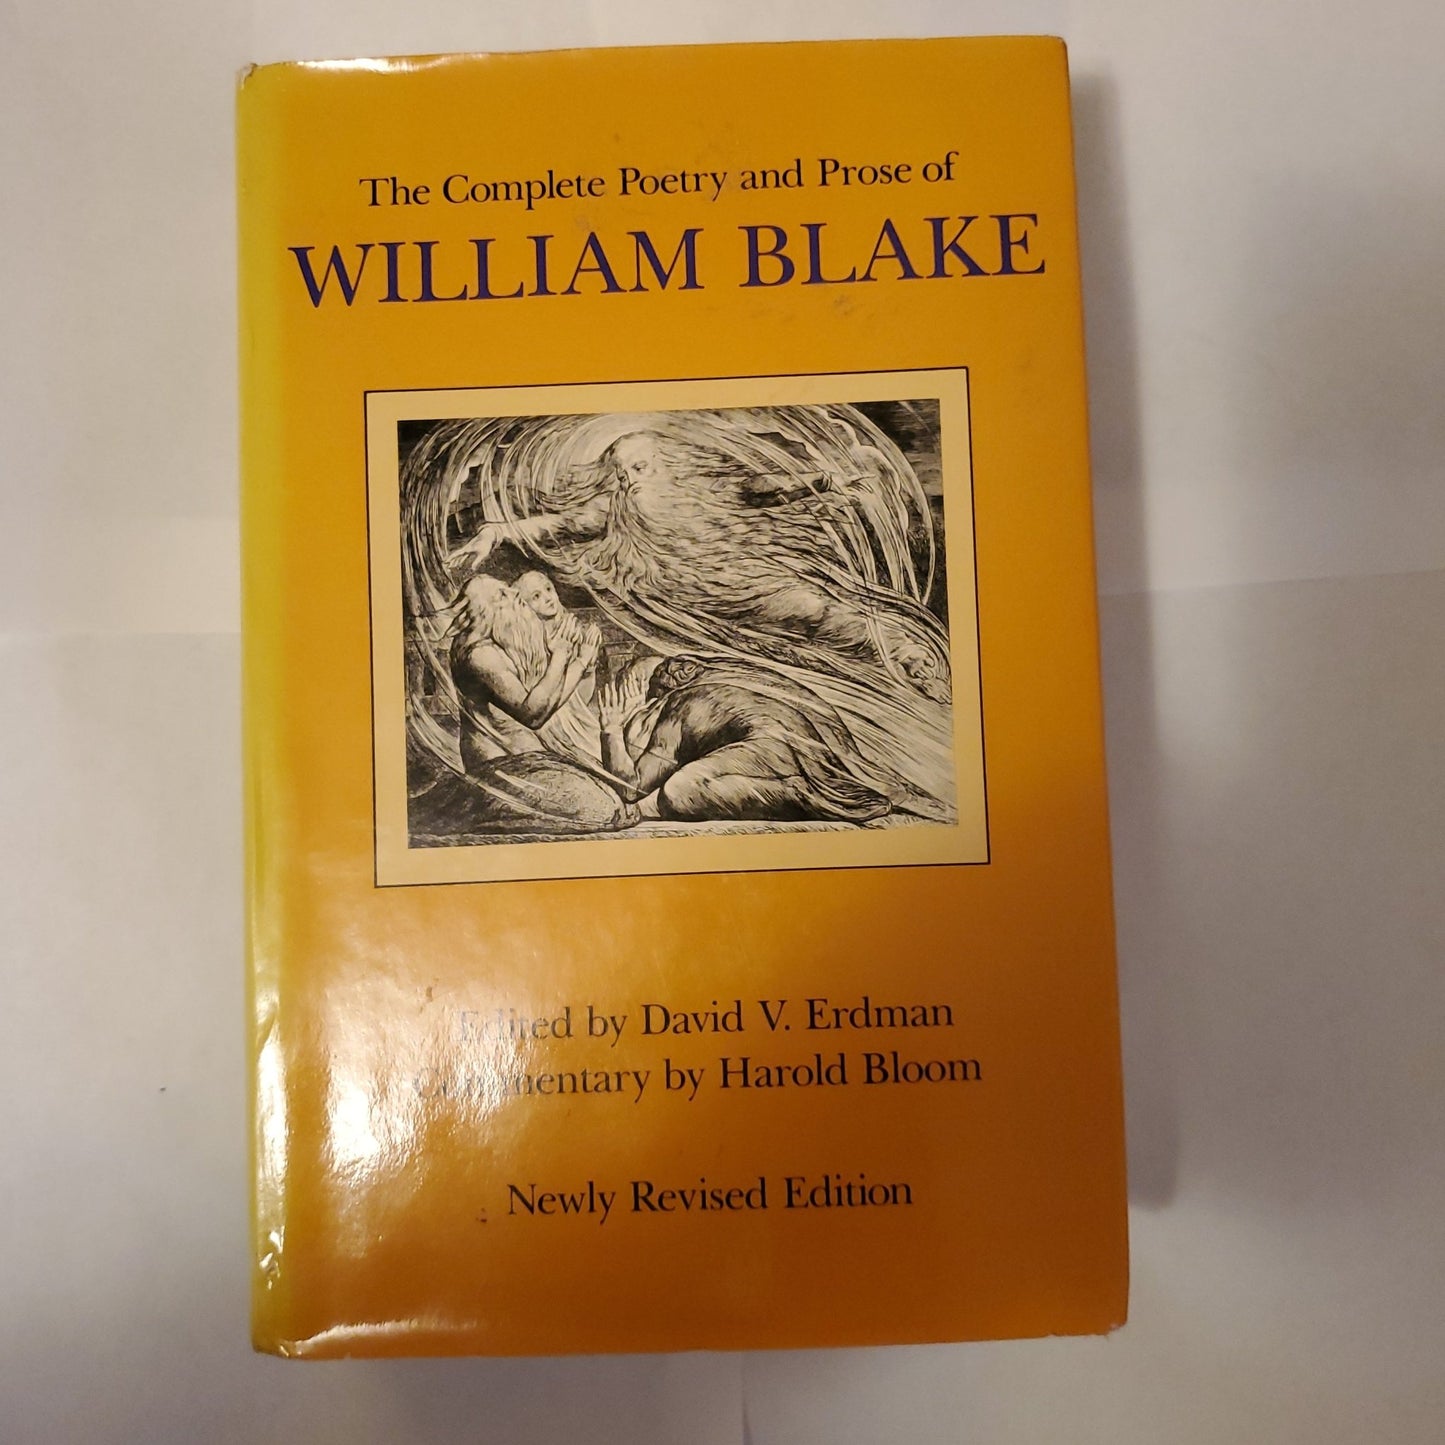 The Complete Poetry and Prose of William Blake - [ash-ling] Booksellers